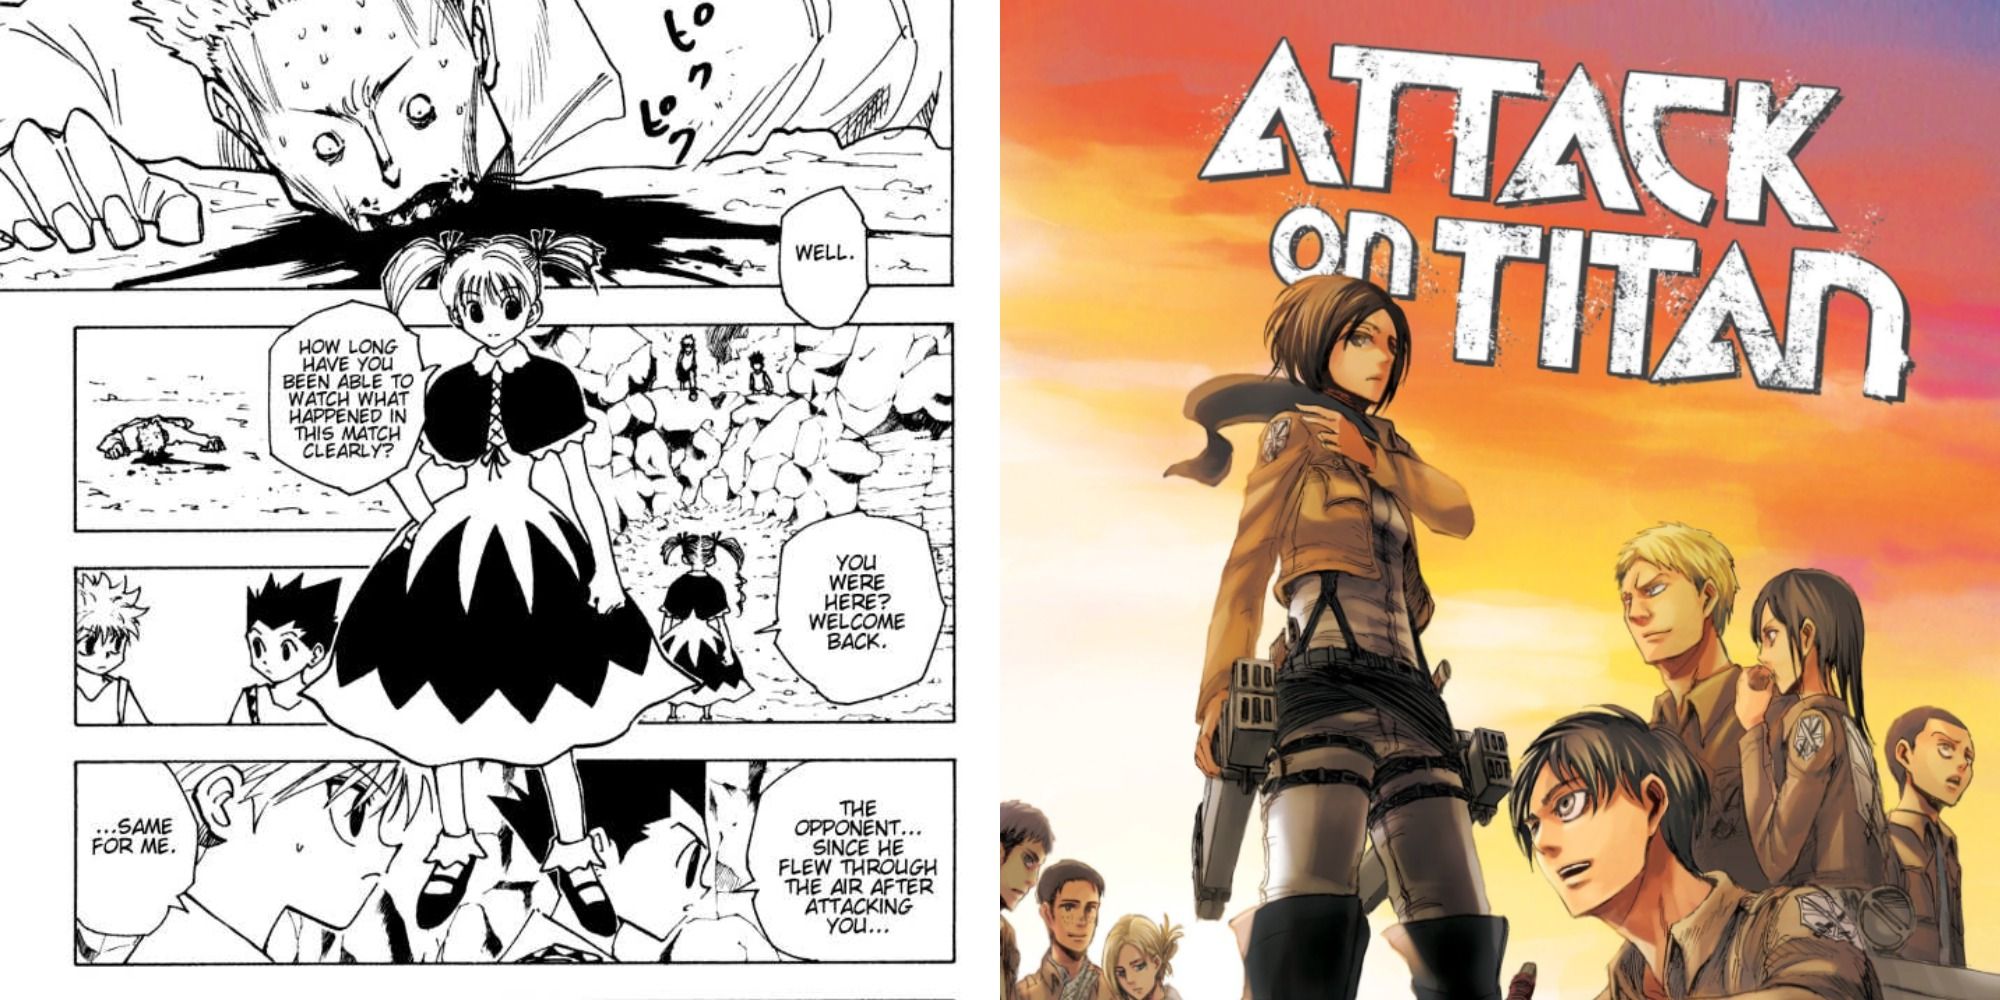 Two side by side images of the cover of an Attack on Titan manga and a panel from Hunter X Hunter